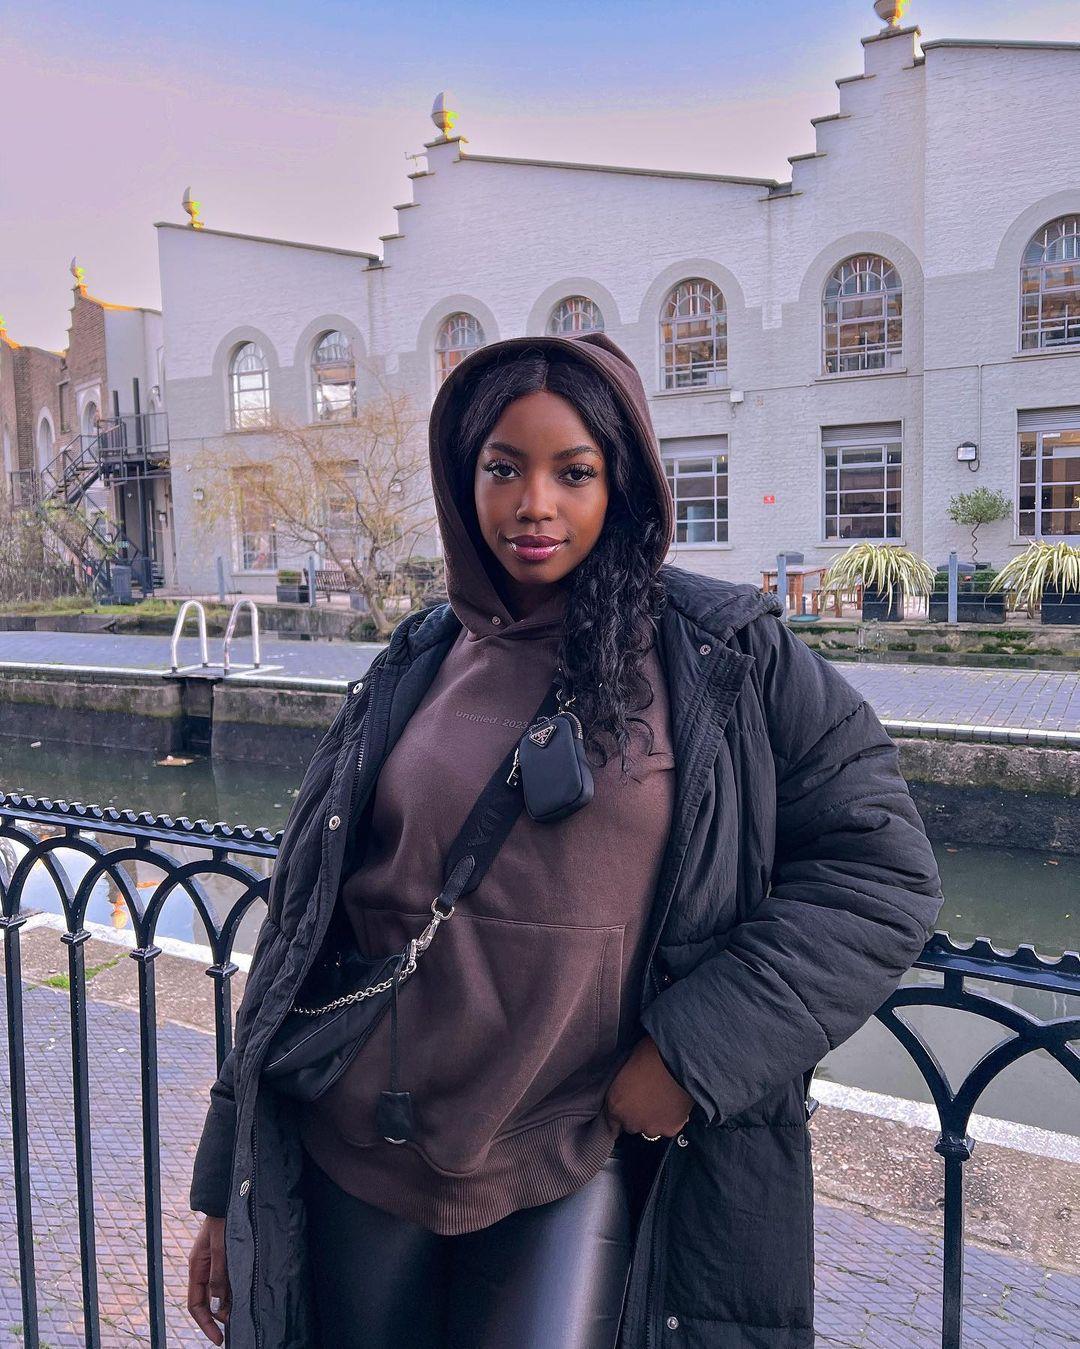 class="content__text"
 Focus on why it bothers you, not what he/she said 💕✨☁️🌪️

Jacket: missguided
Bag: prada 
Hoodie: zara 
.
.
.
.
.
.

 #blackgirlblogger #blackgirlfashion #brownskingirl #blackbeauty #outfitgoals #inspoforallgirls #streetstyle #whatiworetoday #streetwear #viral #styleinspo #pufferjacket 
blackgirlblogger blackgirlfashion streetstysle aesthetic 
 